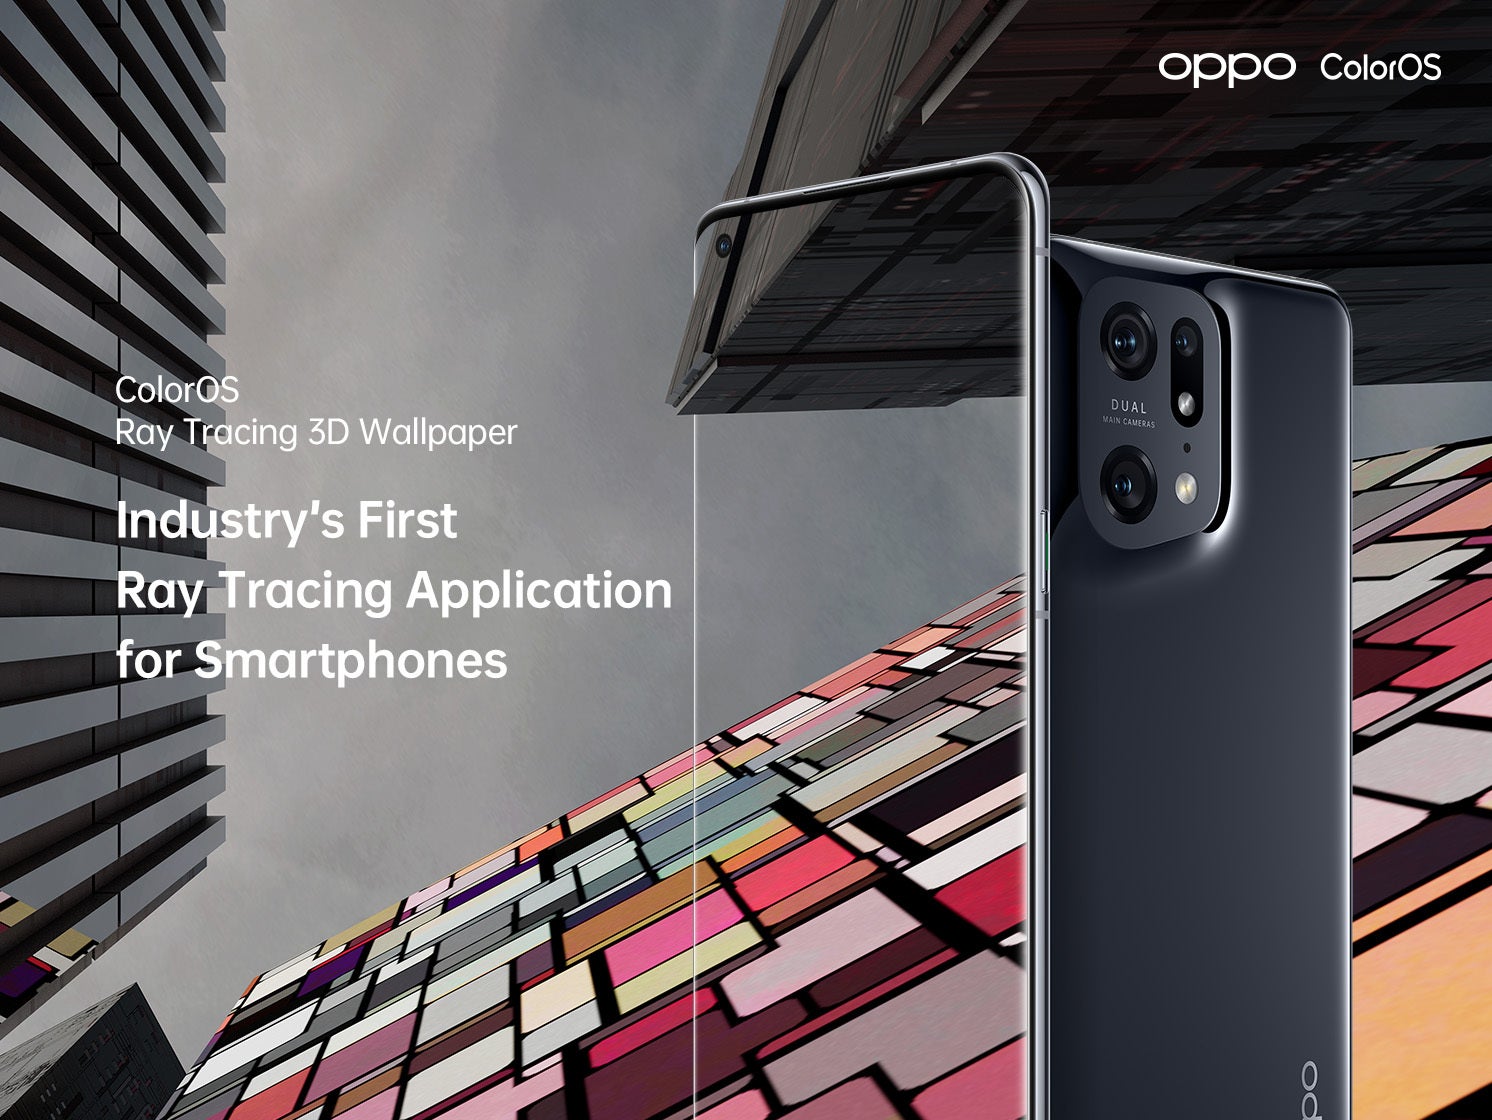 The first ray-tracing mobile app is a 3D wallpaper by Oppo - The first mobile app to support ray-tracing comes from Oppo in the form of 3D wallpapers